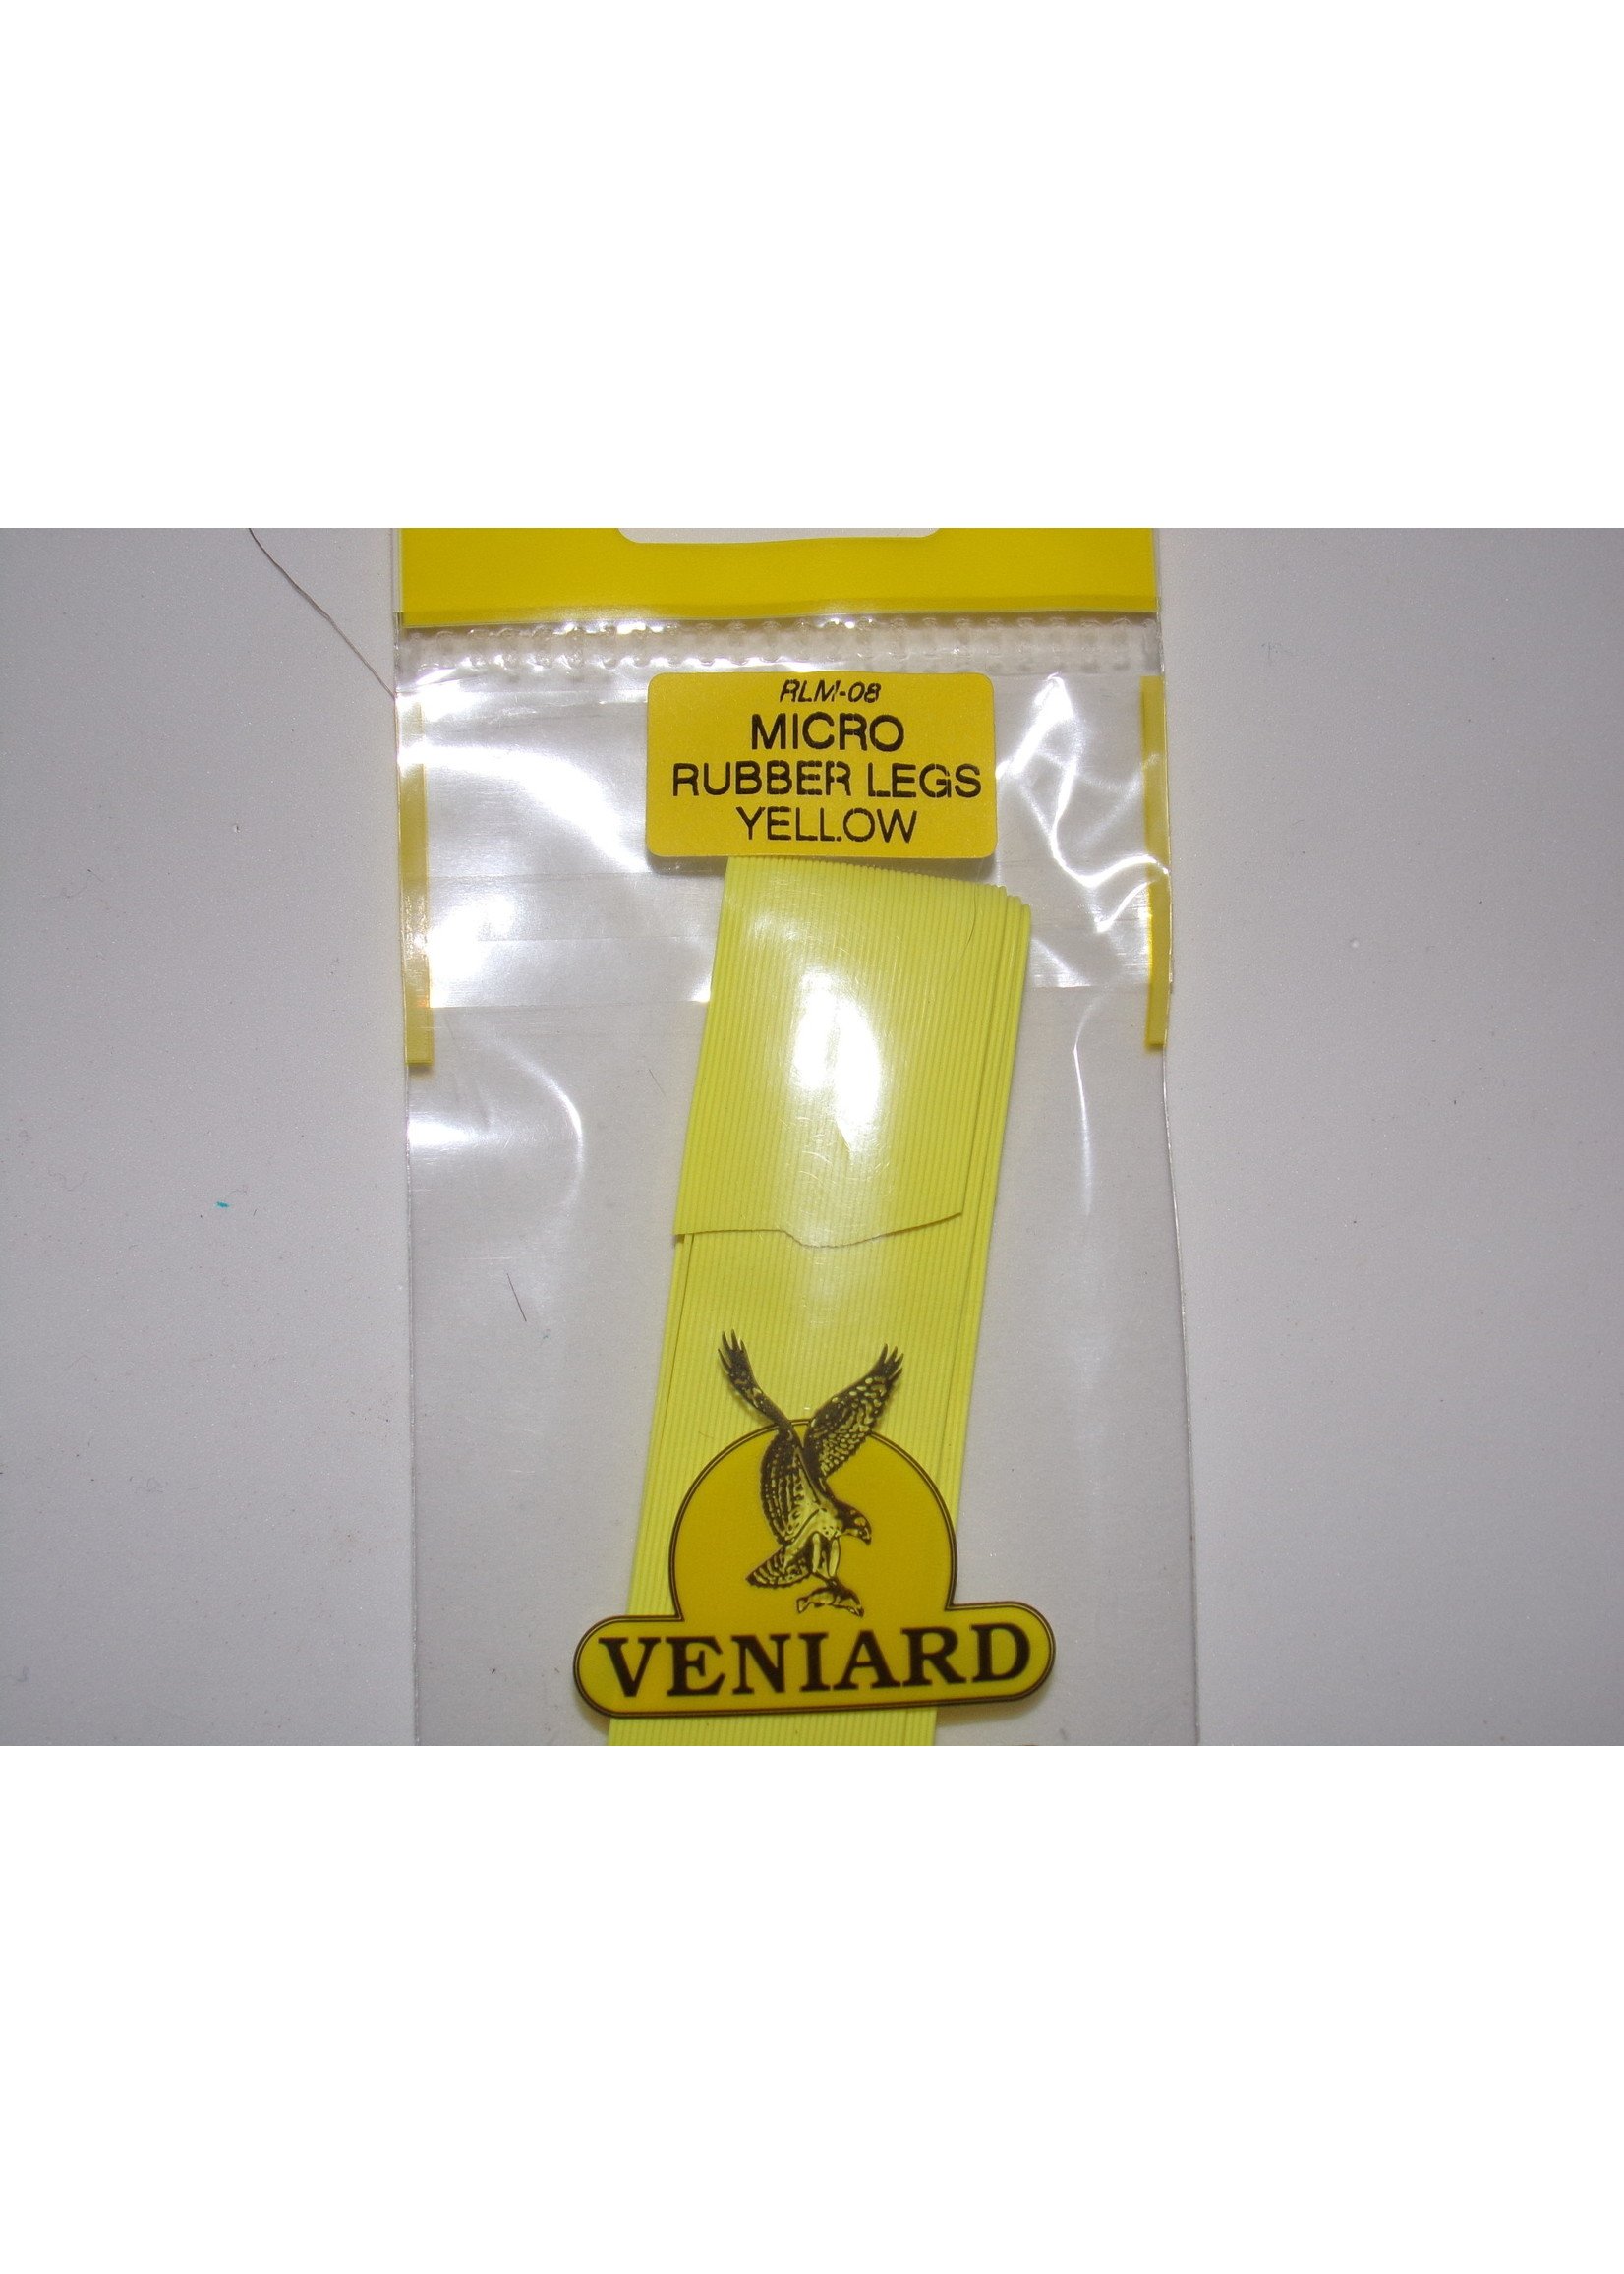 Standard rubber legs Color Yellow